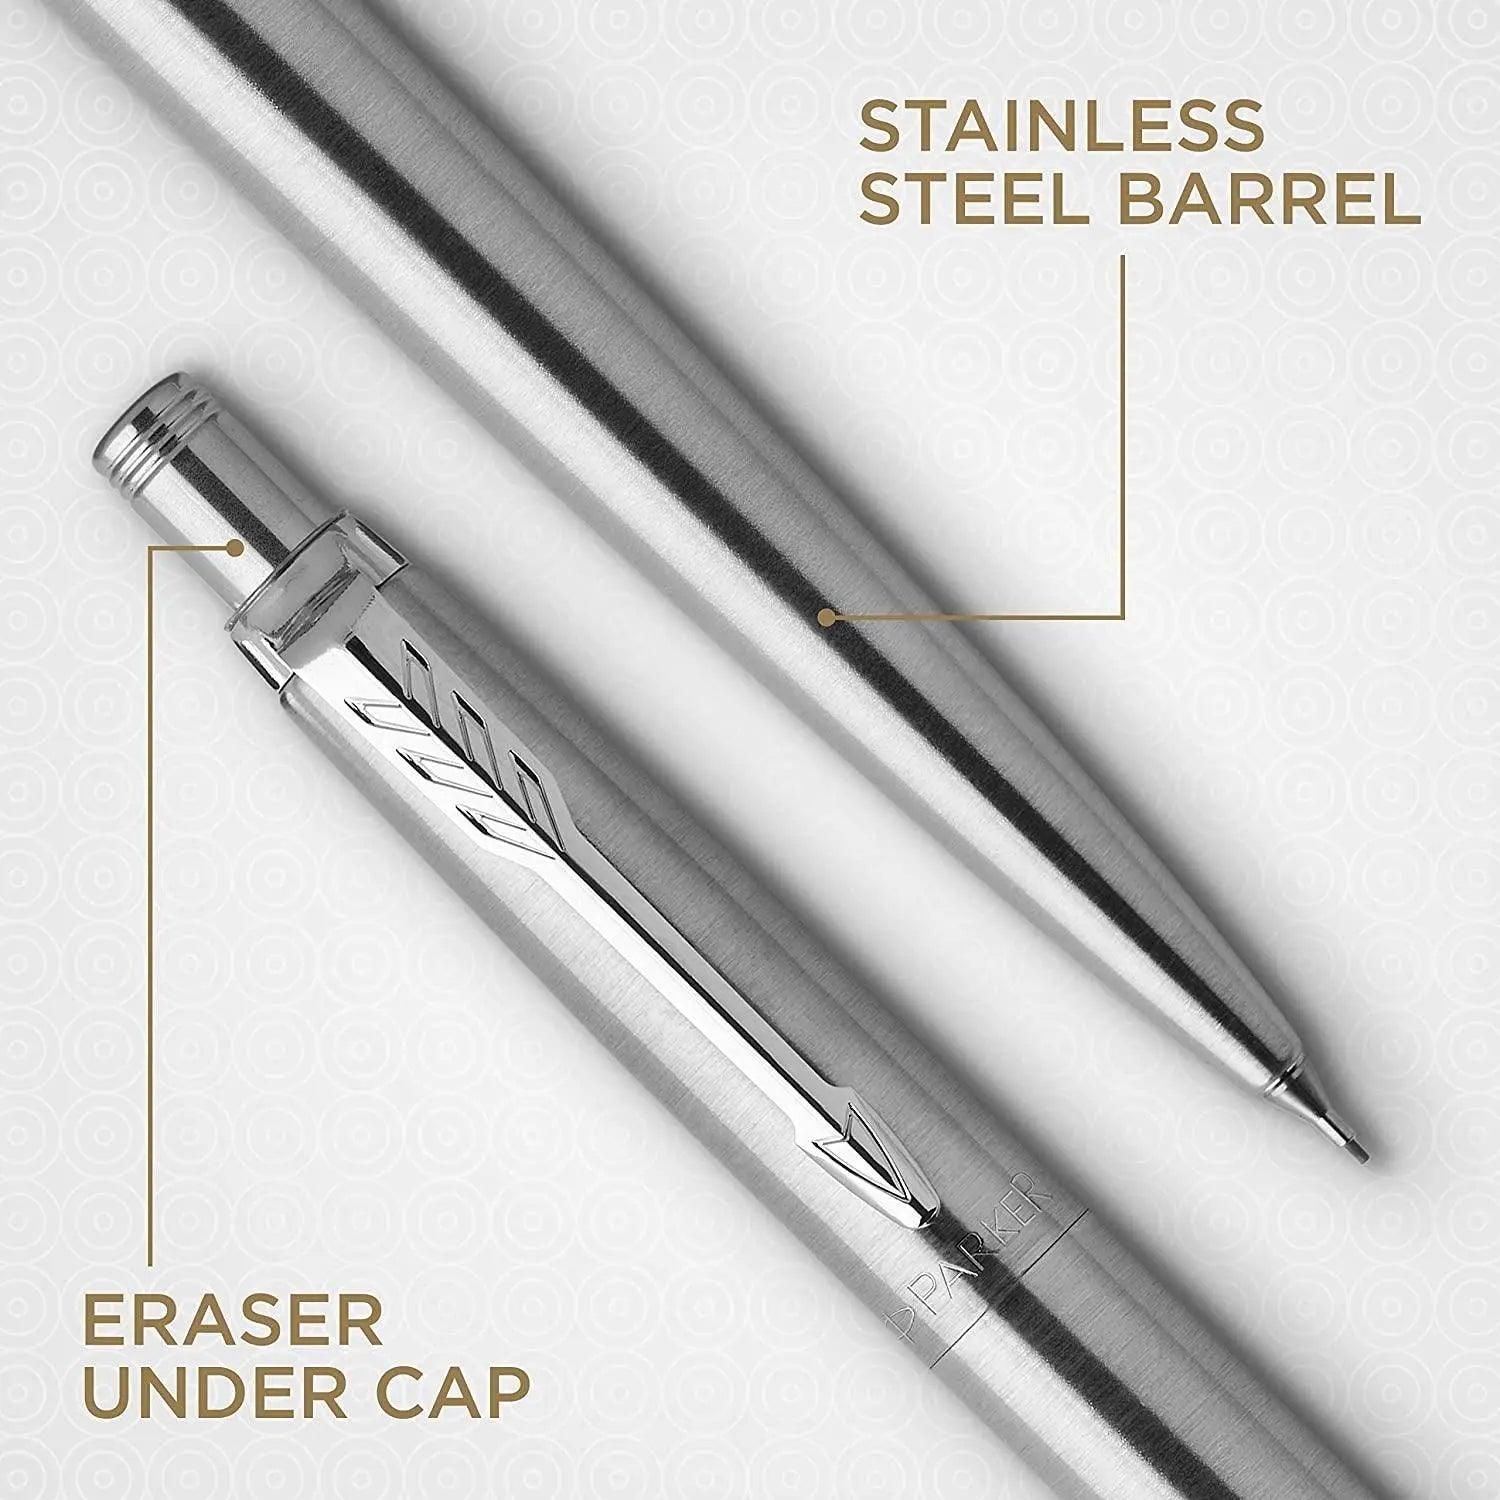 Parker Mechanical Pencil , Jotter, Stainless Steel with Chrome Trim, Medium Point (0.5mm) The Stationers